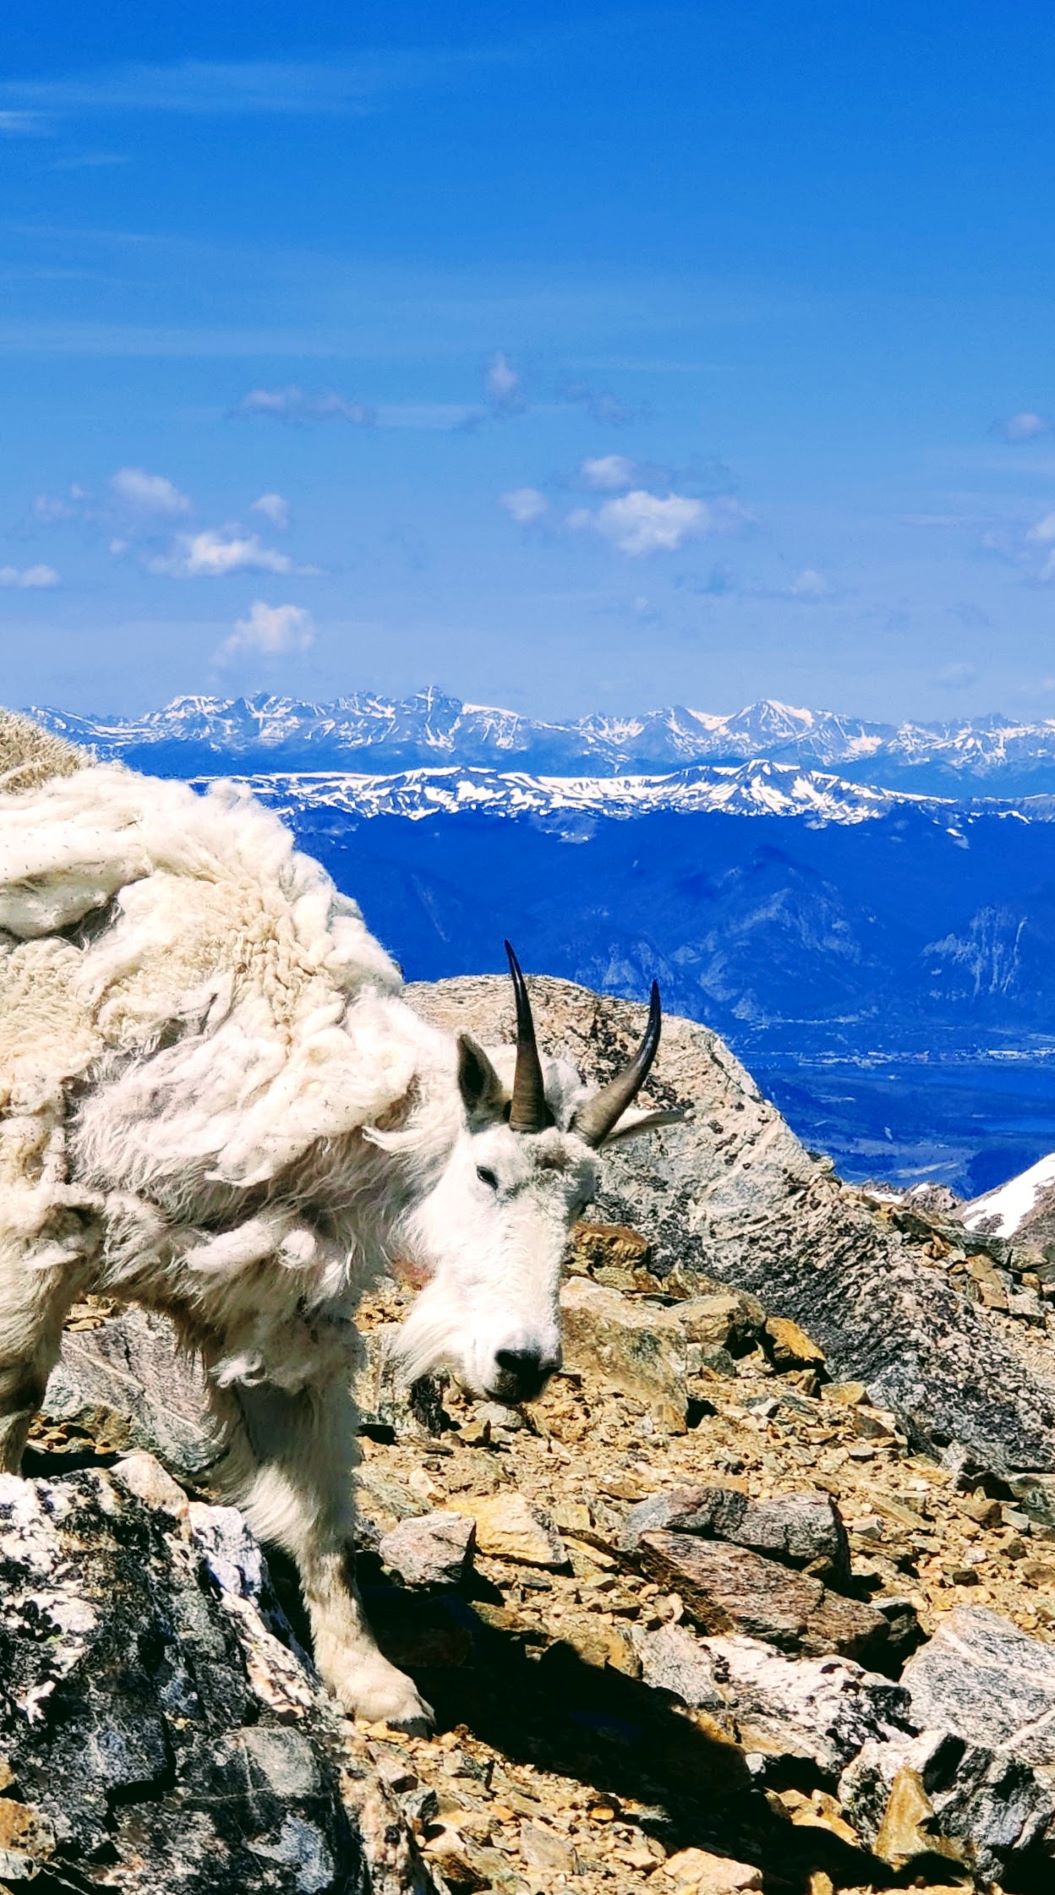 A close up image of a mountain goat posing on a trail in Colorado as snow-capped peaks rise behind him dozens of miles in the distance